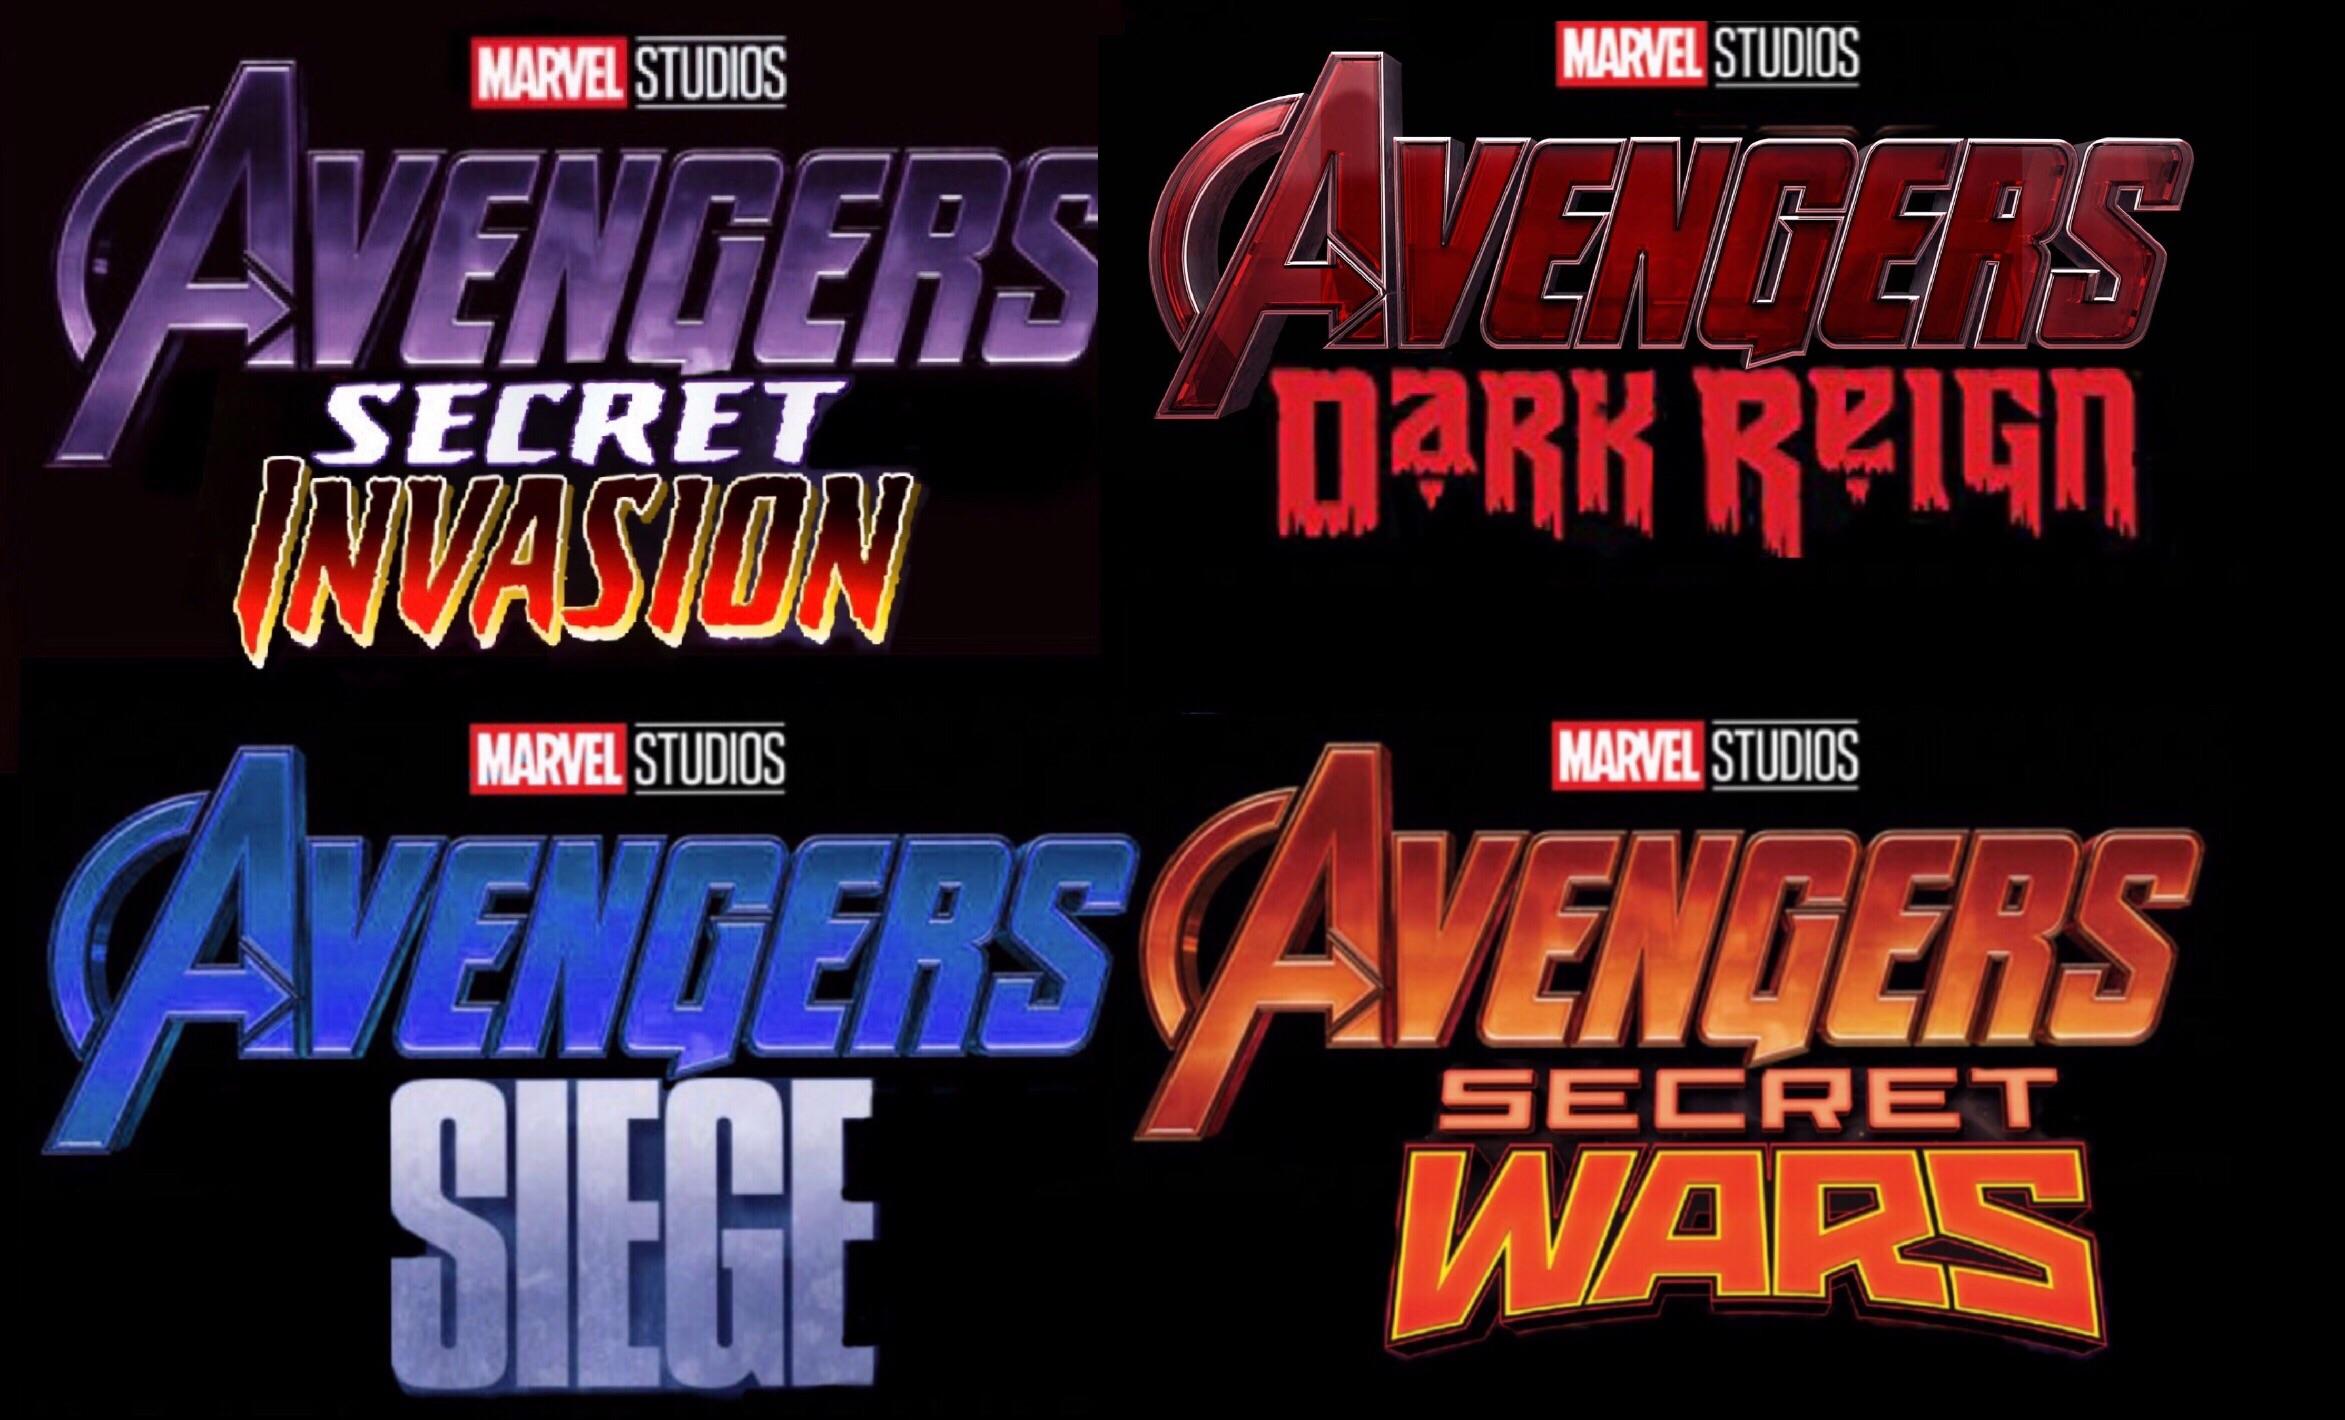 Avengers 5 release date and title